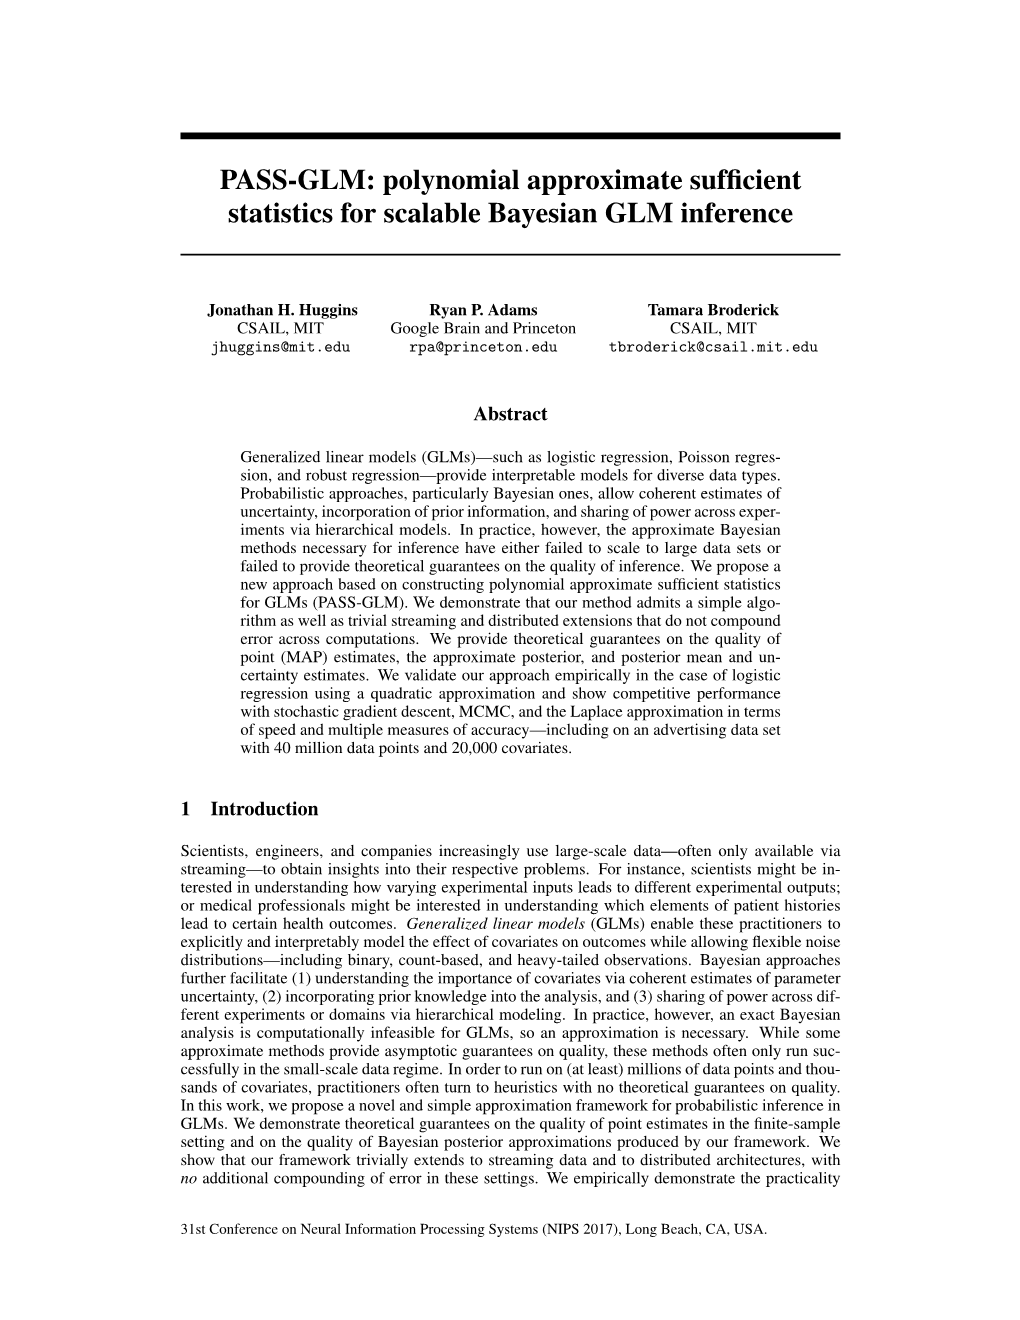 Polynomial Approximate Sufficient Statistics for Scalable Bayesian GLM